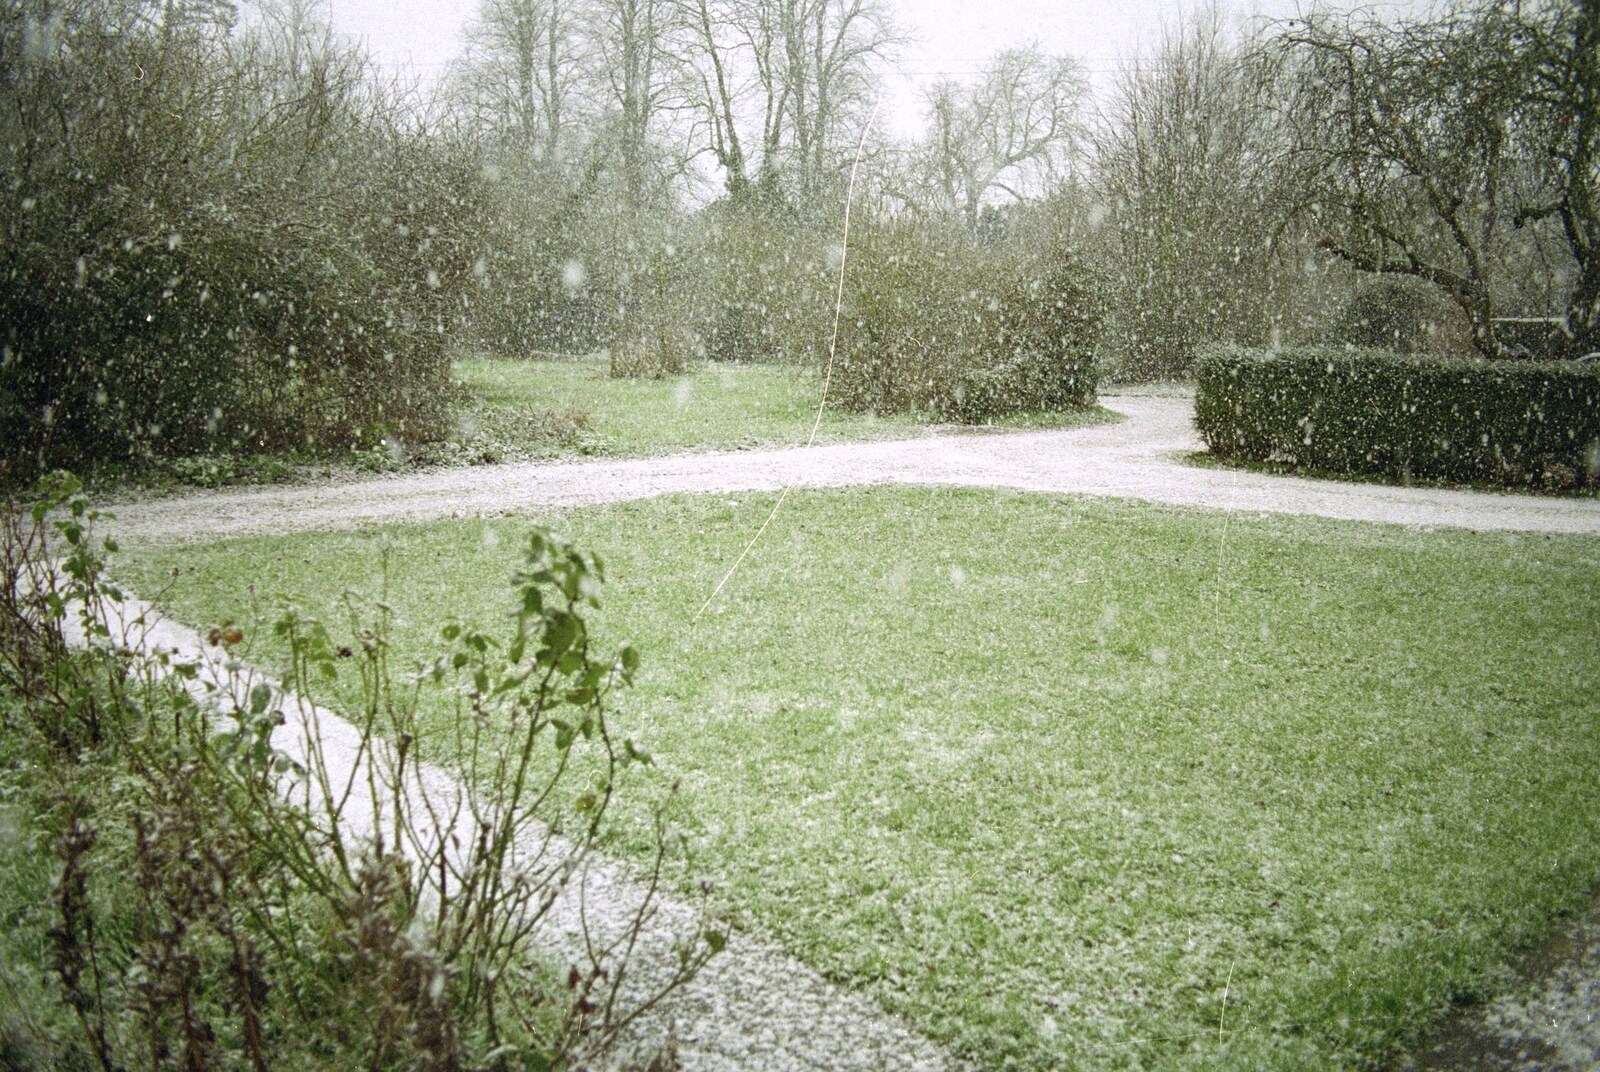 It starts snowing outside Nosher's pad from New Year's Eve in the Swan Inn, Brome, Suffolk - 31st December 1995